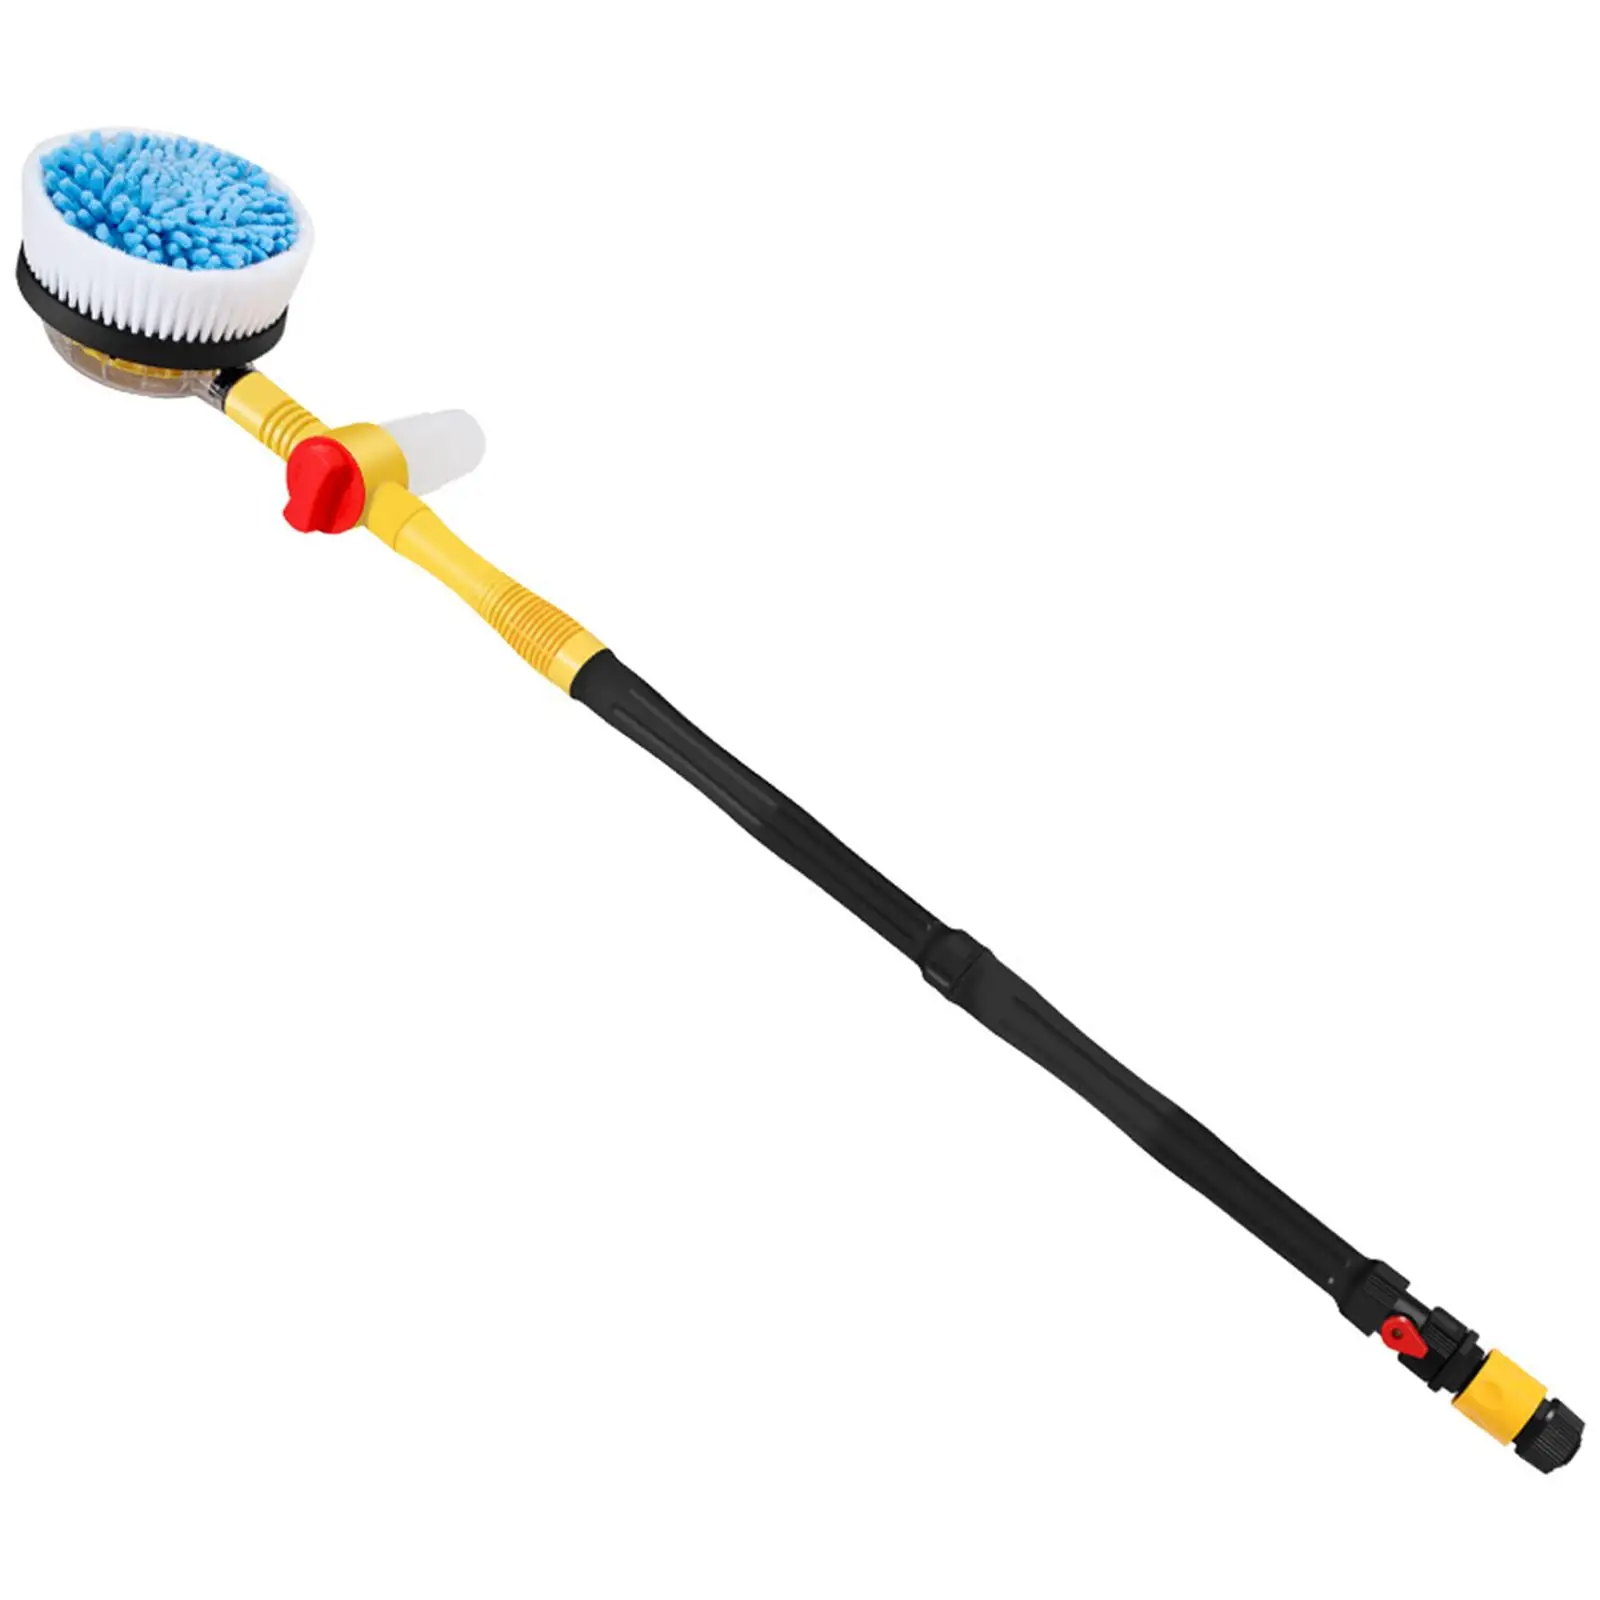 Car Rotary Wash Brush Kit High Pressure Washer Fit for Automotive Cleaning